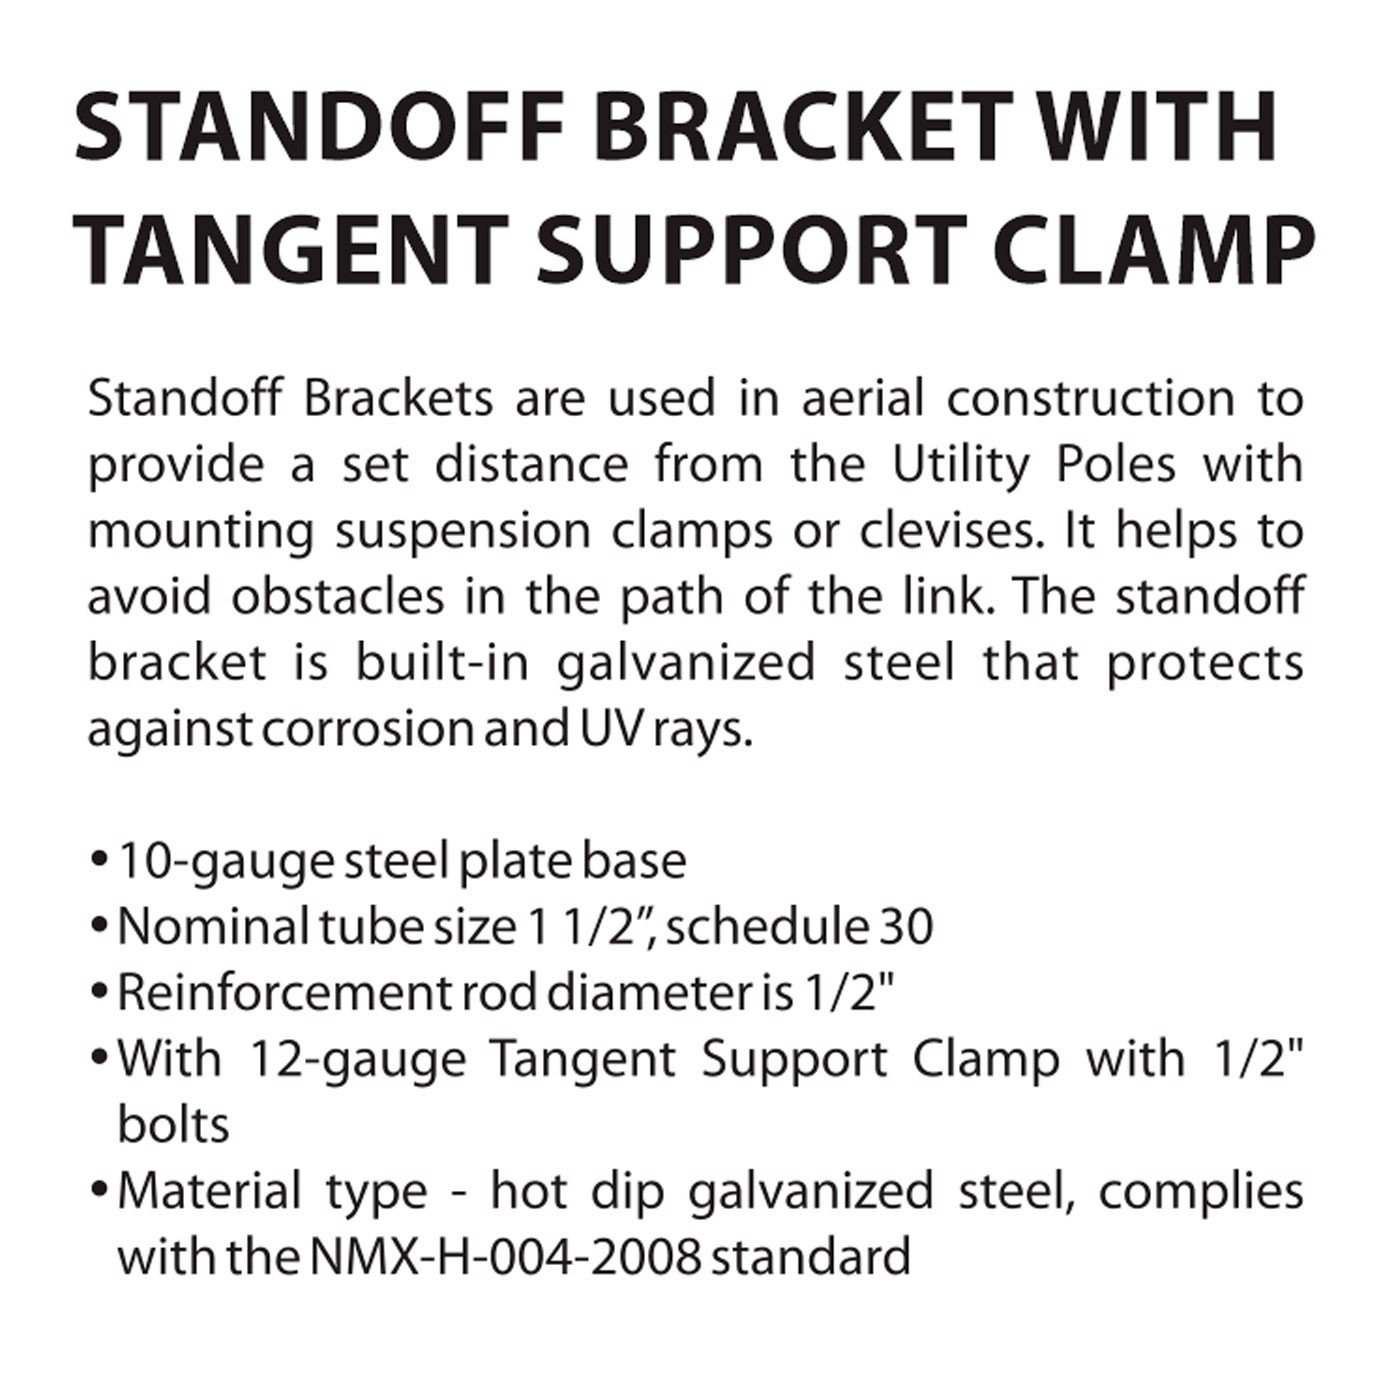 STANDOFF BRACKET WITH TANGENT SUPPORT CLAMP